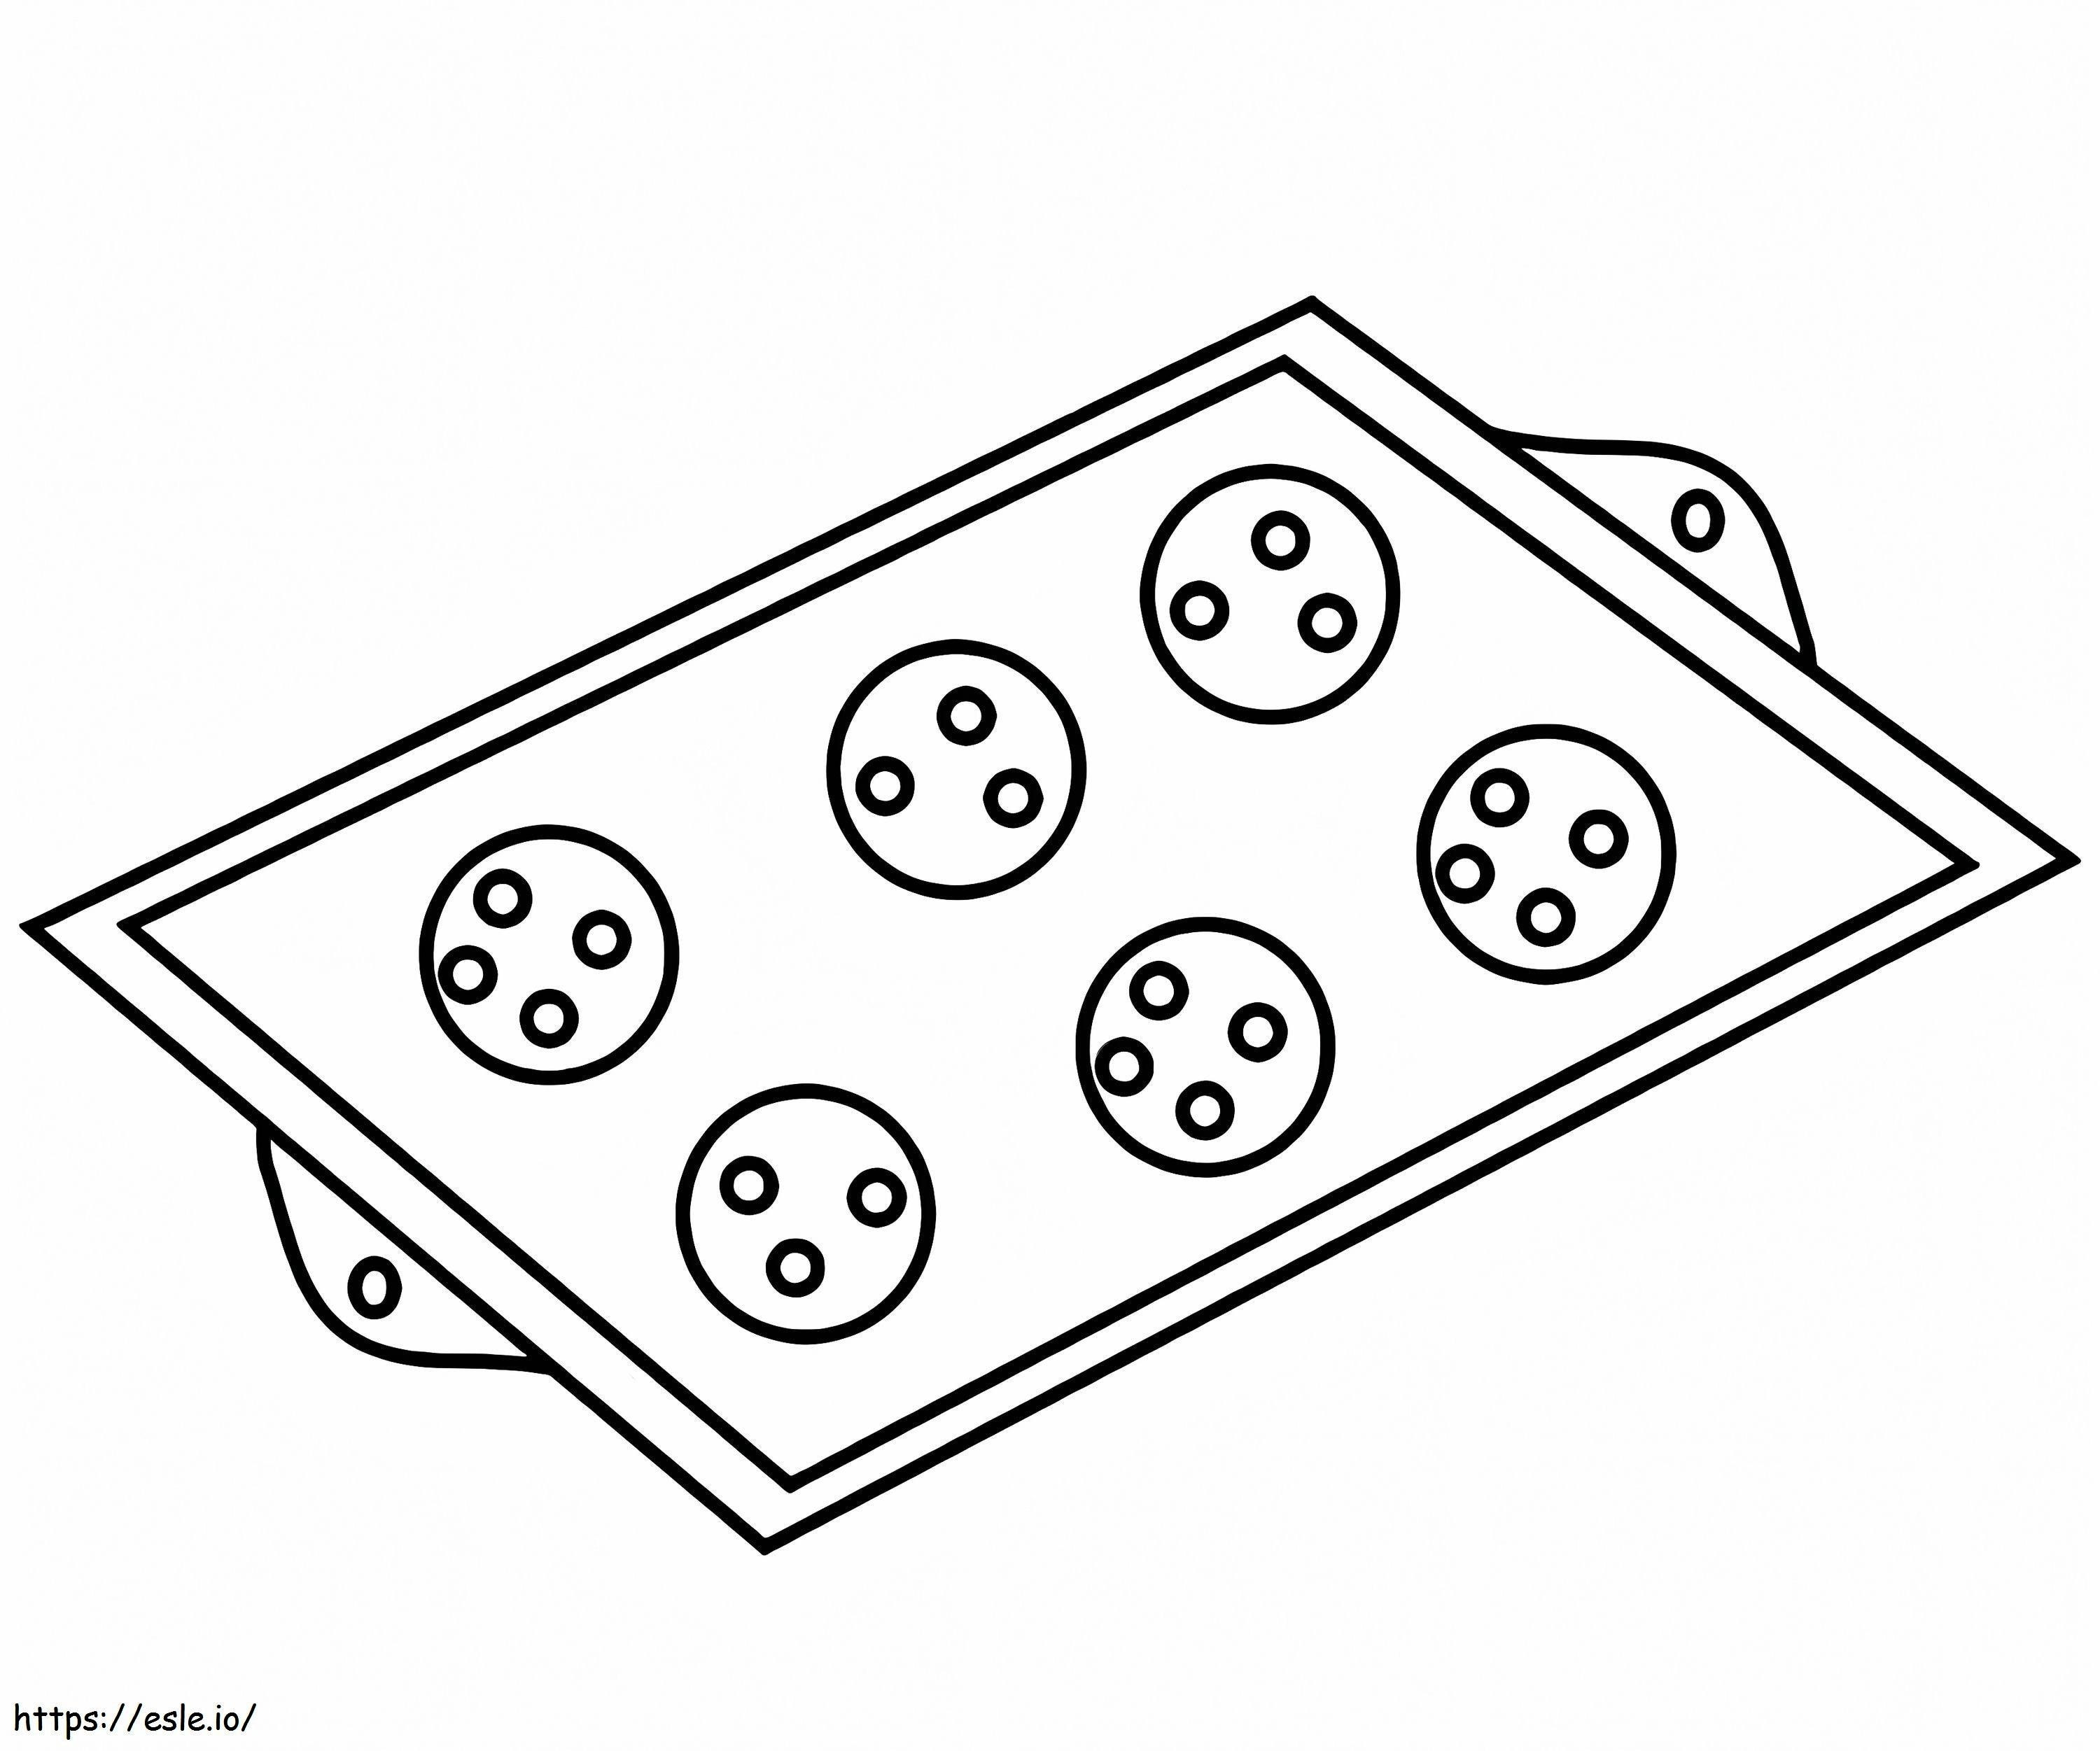 Cookies On Tray coloring page